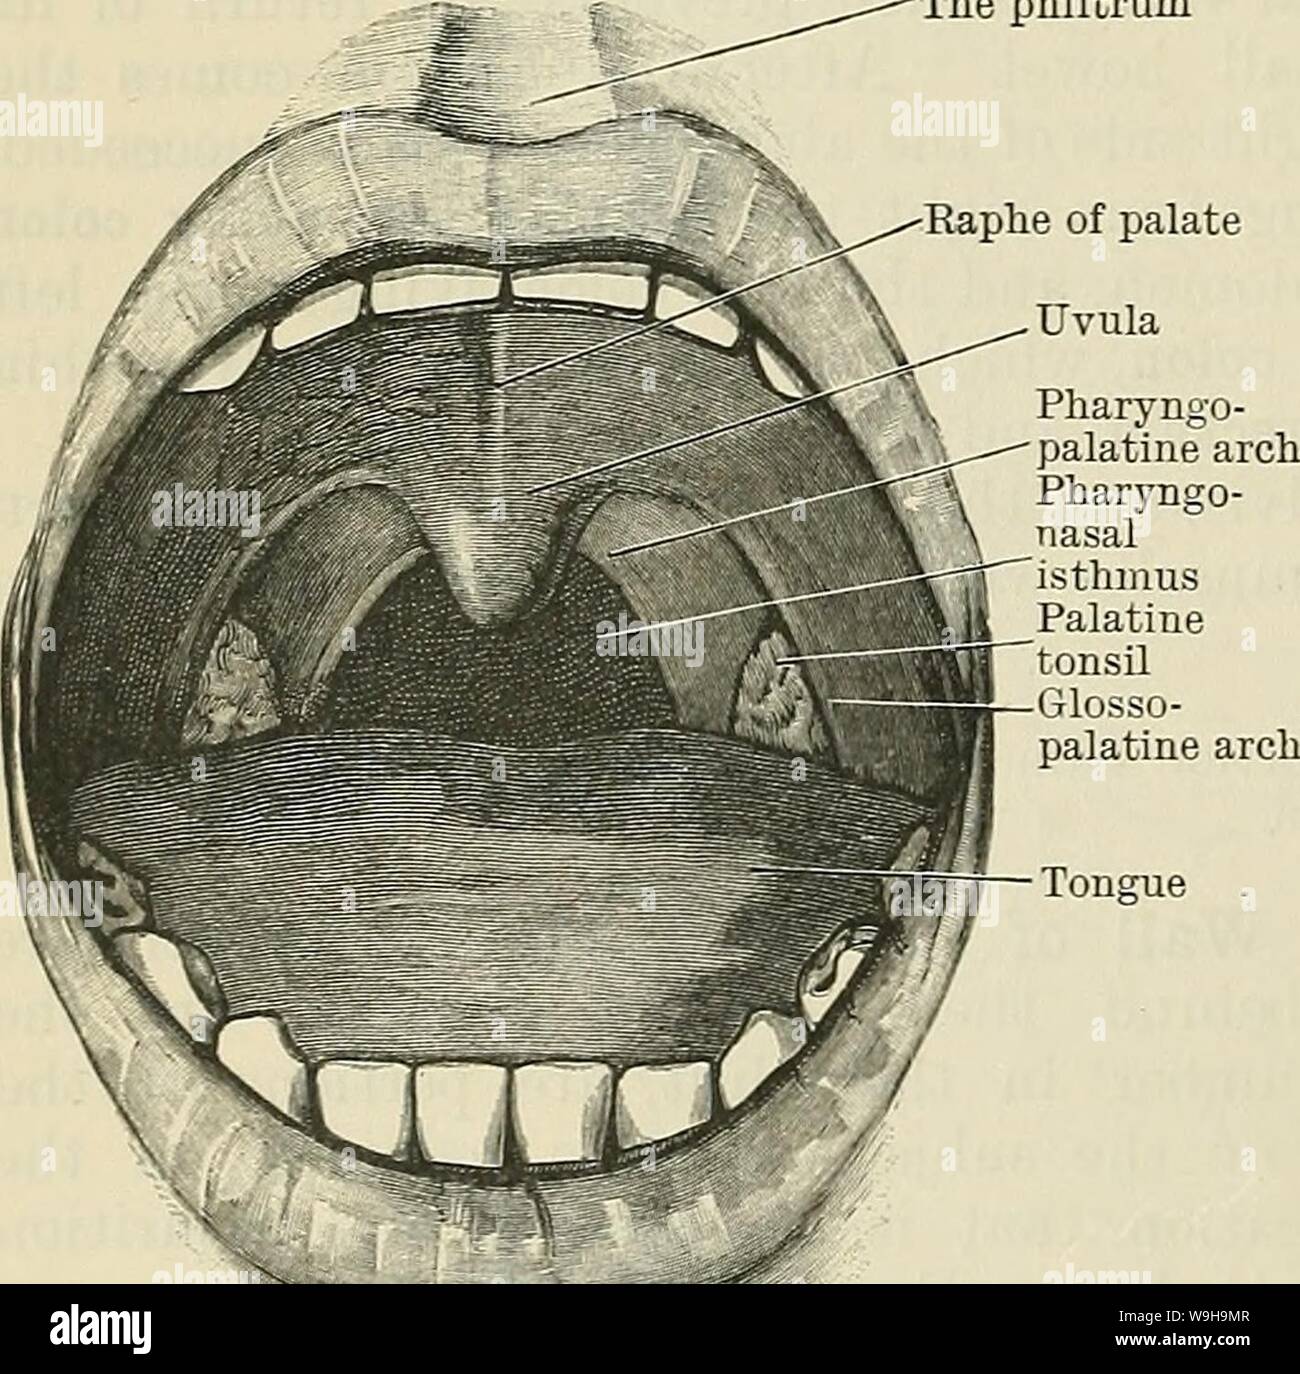 Archive image from page 1139 of Cunningham's Text-book of anatomy (1914). Cunningham's Text-book of anatomy  cunninghamstextb00cunn Year: 1914 ( 1106 THE DIGESTIVE SYSTEM. III. Accessory Digestive Glands.—The largest of these is the liver (hepar), which occupies the upper and right portion of the abdominal cavity, immediately below the diaphragm, and its secretion—the bile—is conveyed into the duodenum by the bile duct (ductus choledochus). The pancreas, next in size, lies across the front of the vertebral column, with its right end or head resting in the concavity of the duodenum, into which Stock Photo